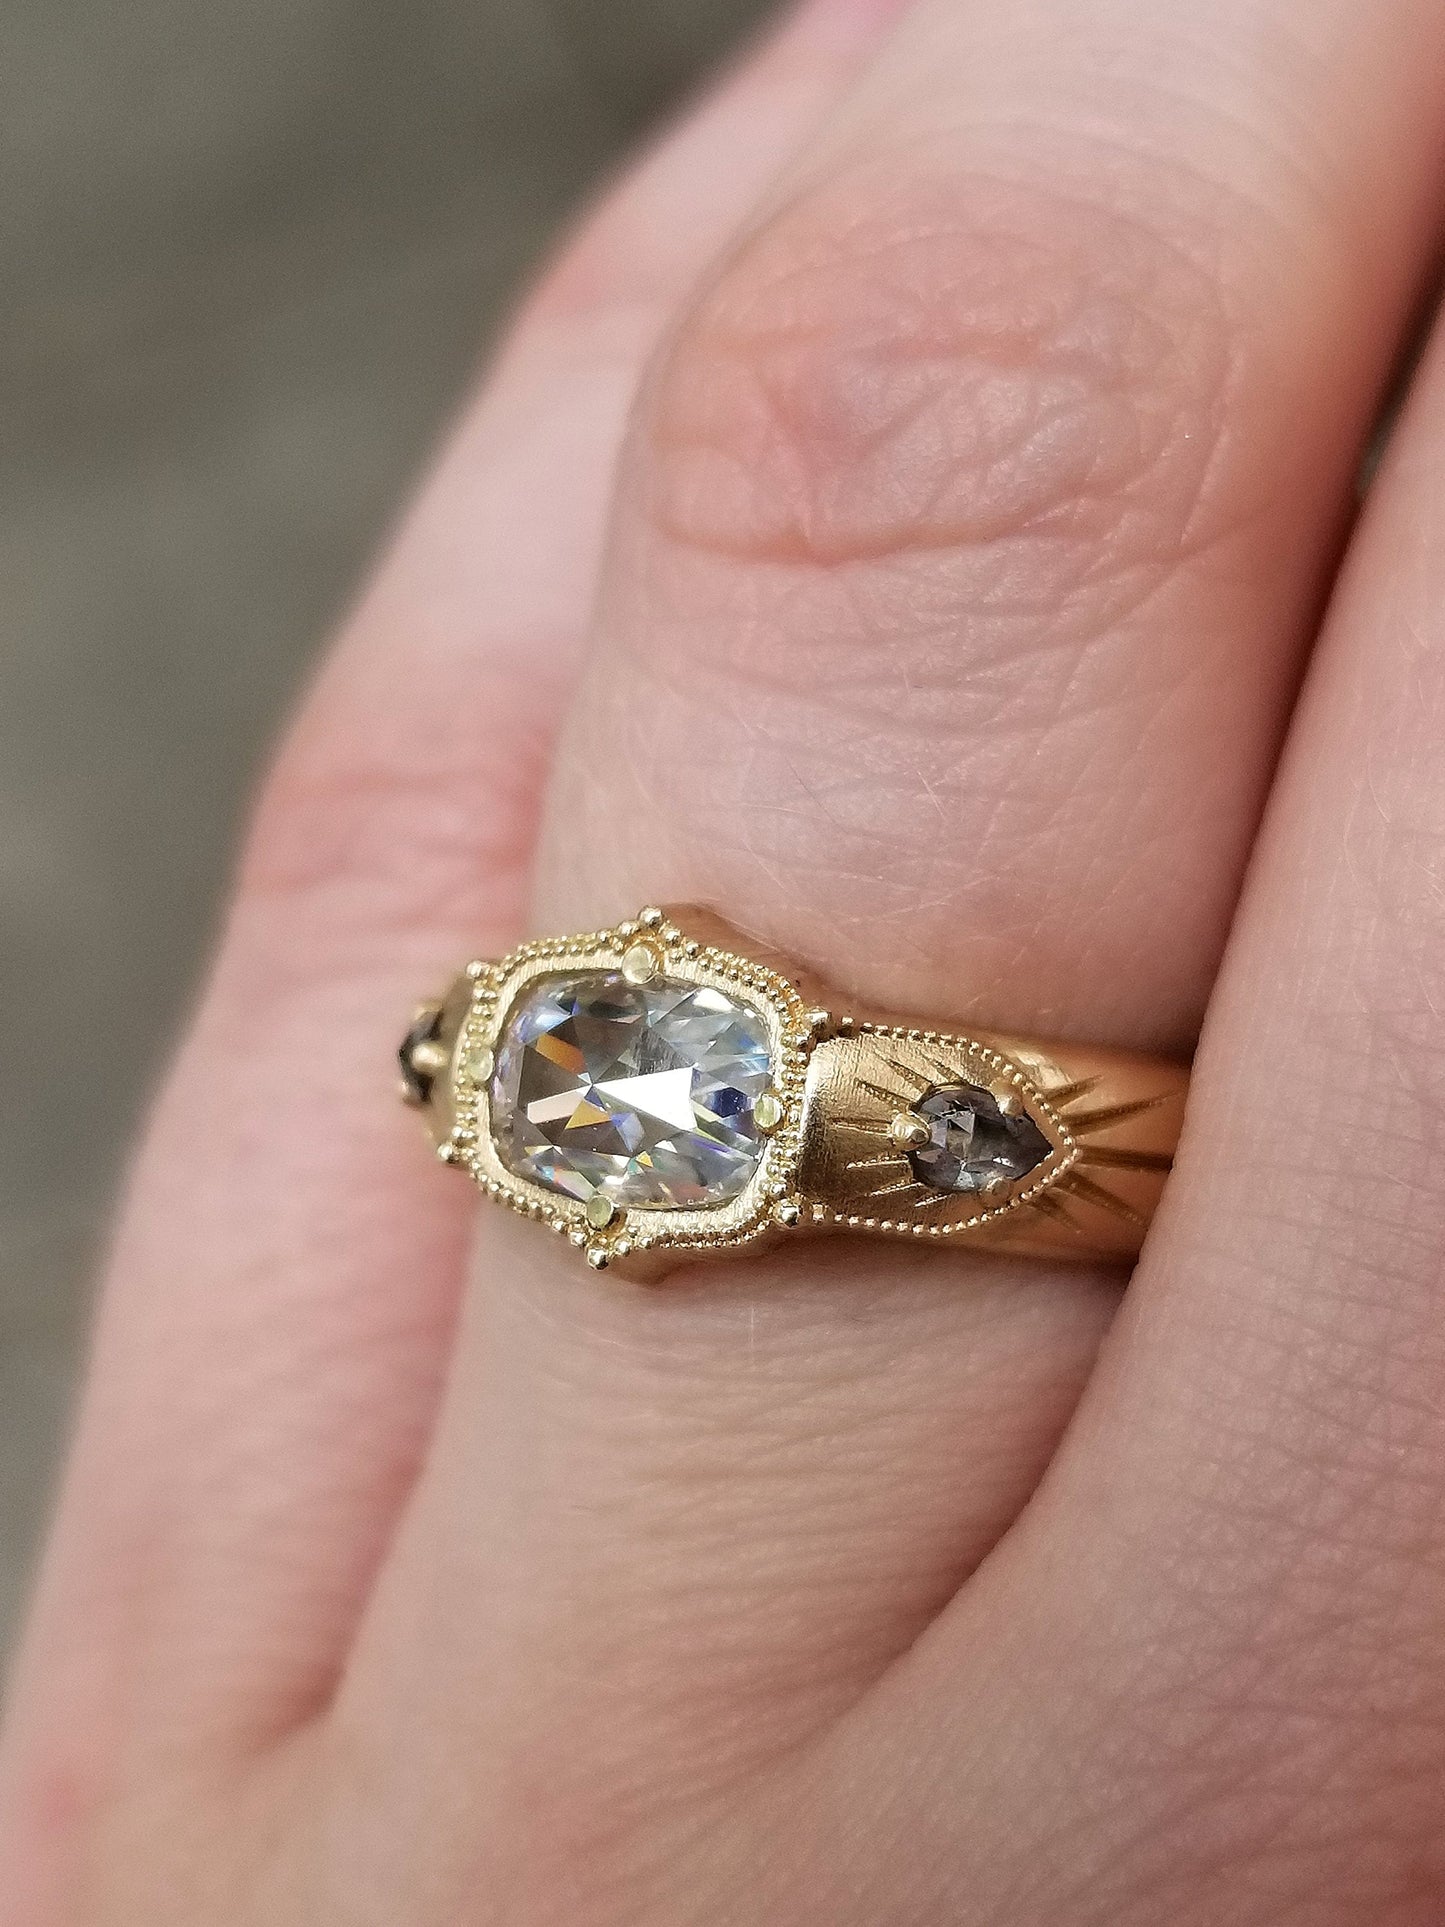 Antique Cushion Moissanite Wide Band Victorian Style Ring with Salt & Pepper Pear Diamonds - Rose Cut Vintage Inspired Engagement Ring